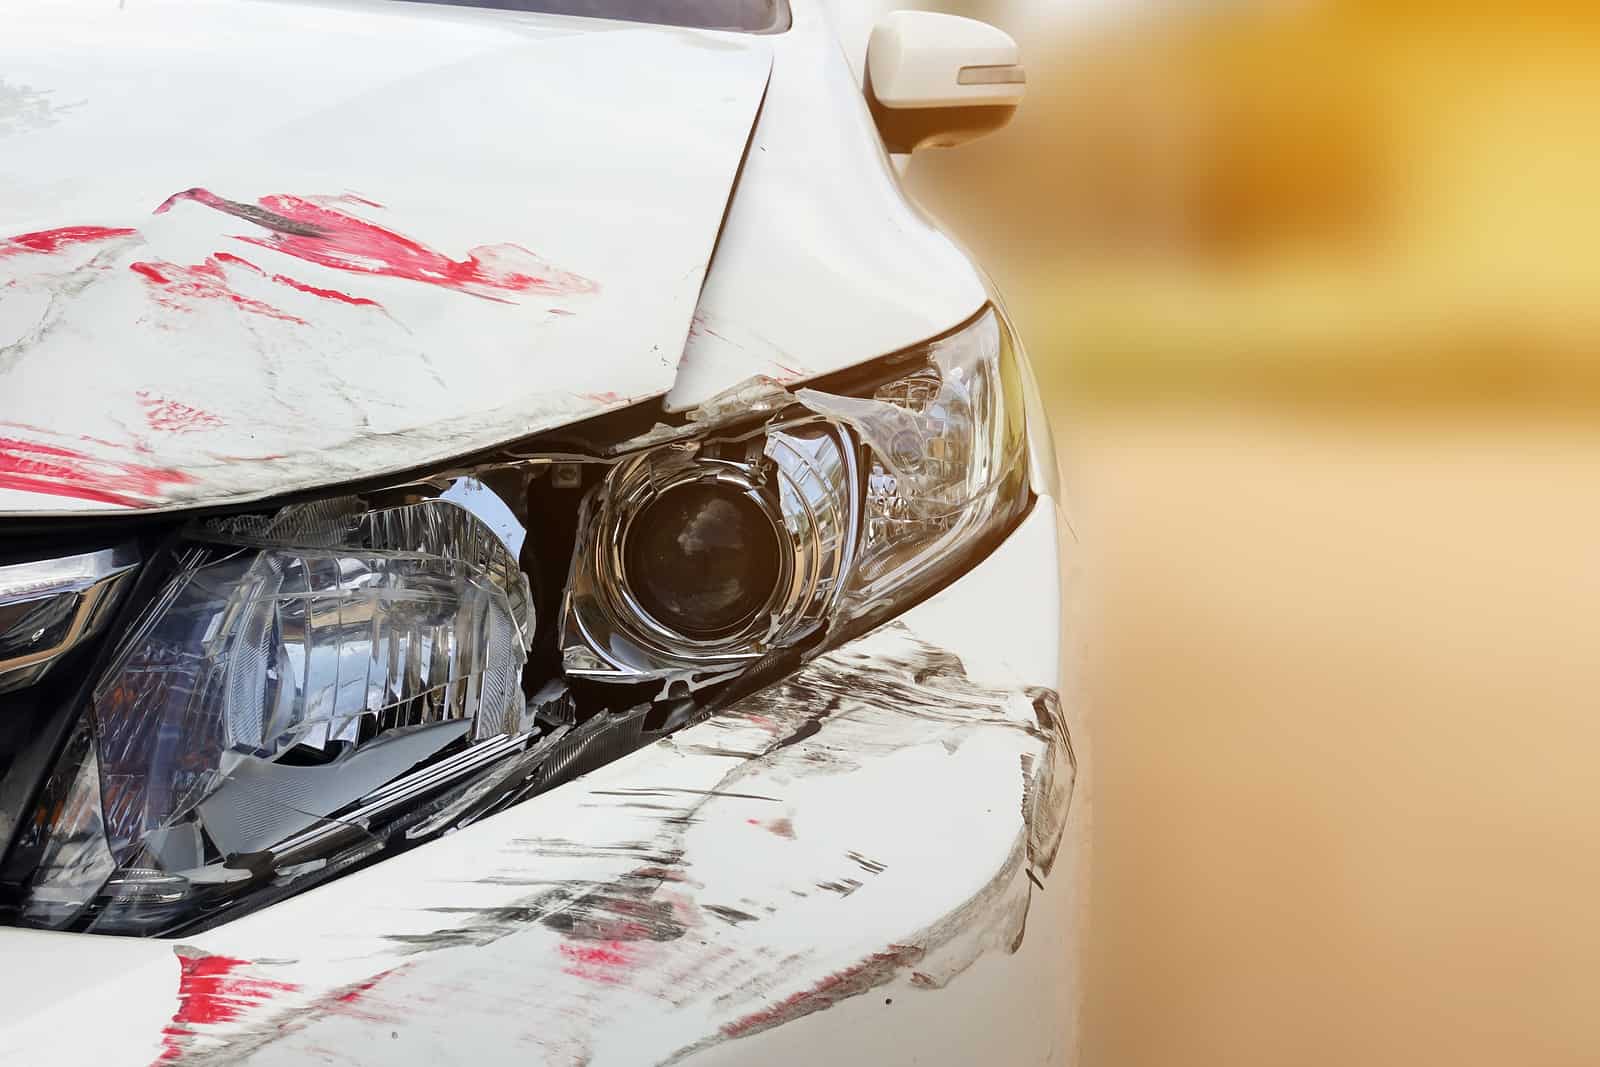 I Crashed My Leased Car – What Do I Do Now?